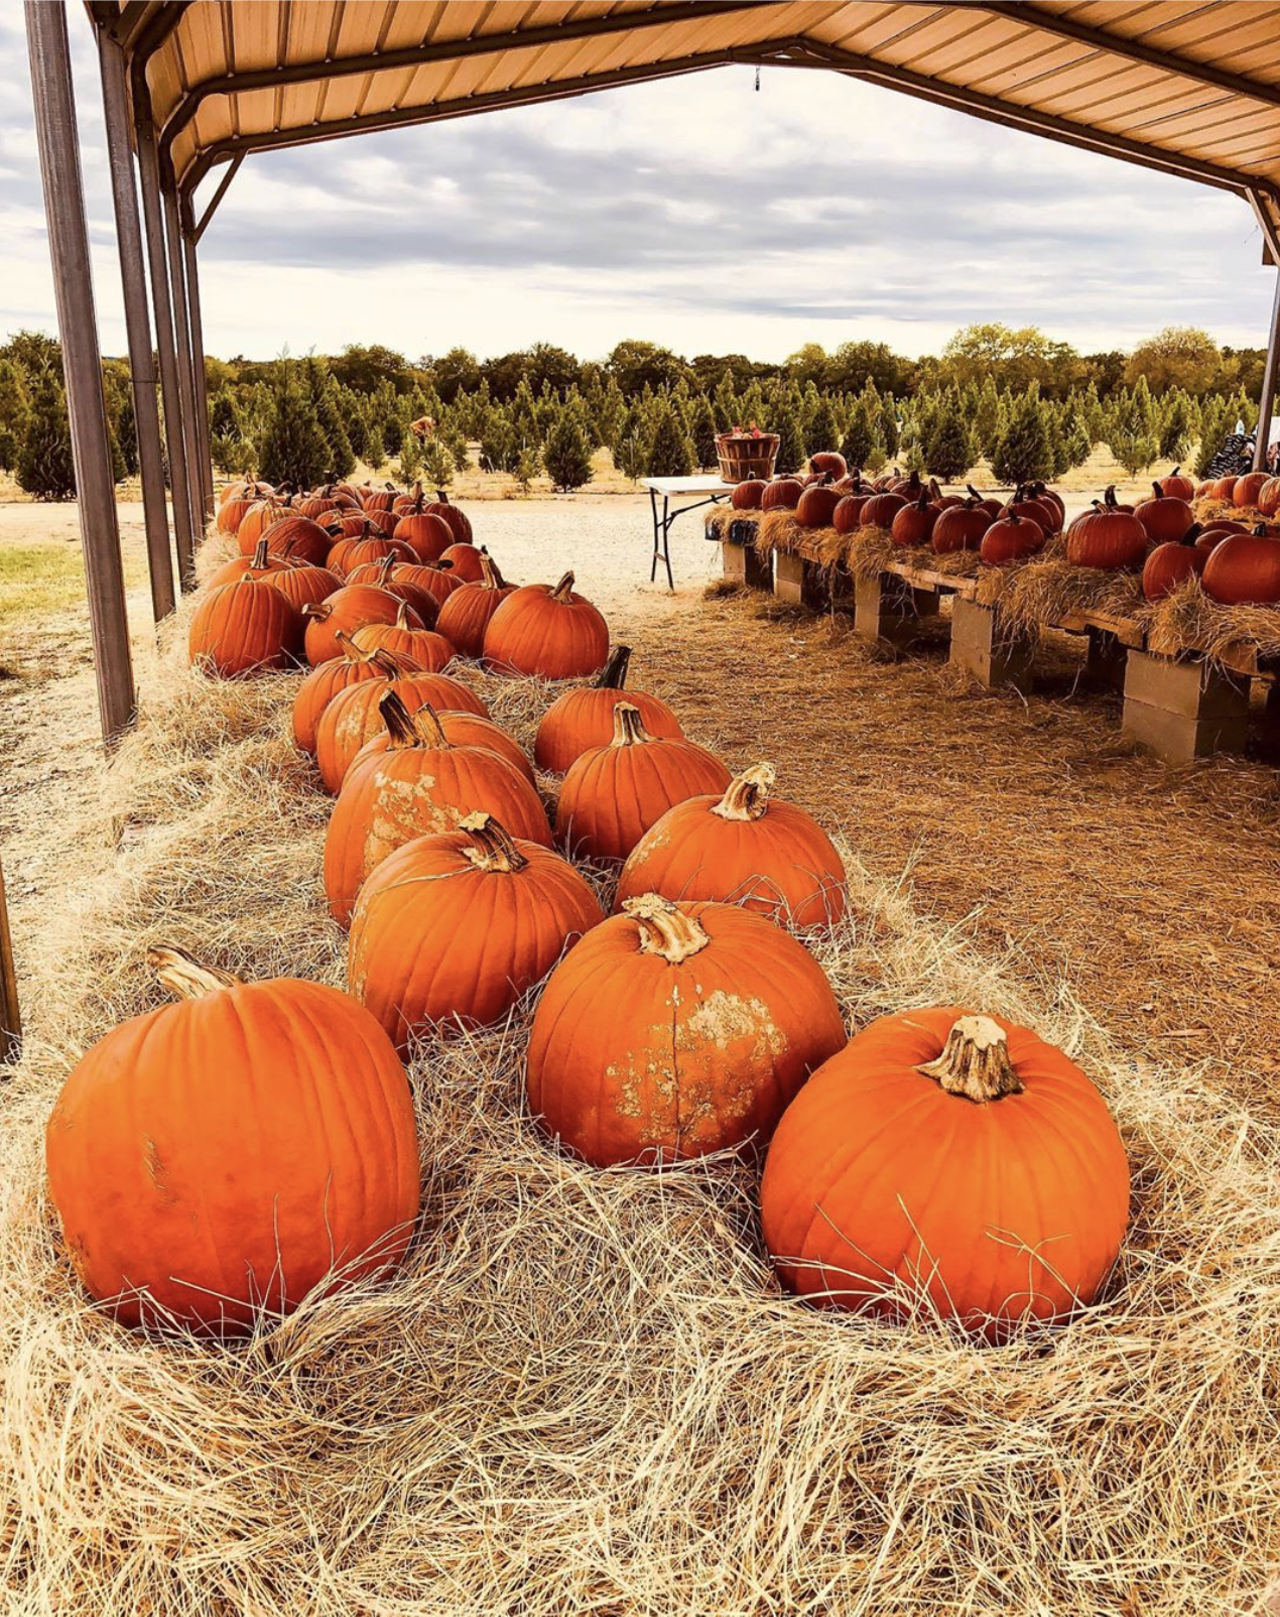 Pipe Creek Pumpkin Patch
805 Phils Rd., Pipe Creek, Texas, (210) 426-6191, pipecreekpumpkinpatch.com
Now in its 10th year, the pumpkin patch at Pipe Creek Christmas Tree Farm is the perfect destination for Hill Country fall fun. Open on Saturdays and Sundays through October 31, the pumpkin patch features kid-friendly activities including pumpkin painting, scarecrow dressing and rubber duck races, plus the opportunity for winter holiday lovers to explore the farm's 6000 Christmas trees. This year, face painting is nixed due to close contact, and face masks are required as a safety precaution. 
Photo via Instagram /  txtravelsandadventures